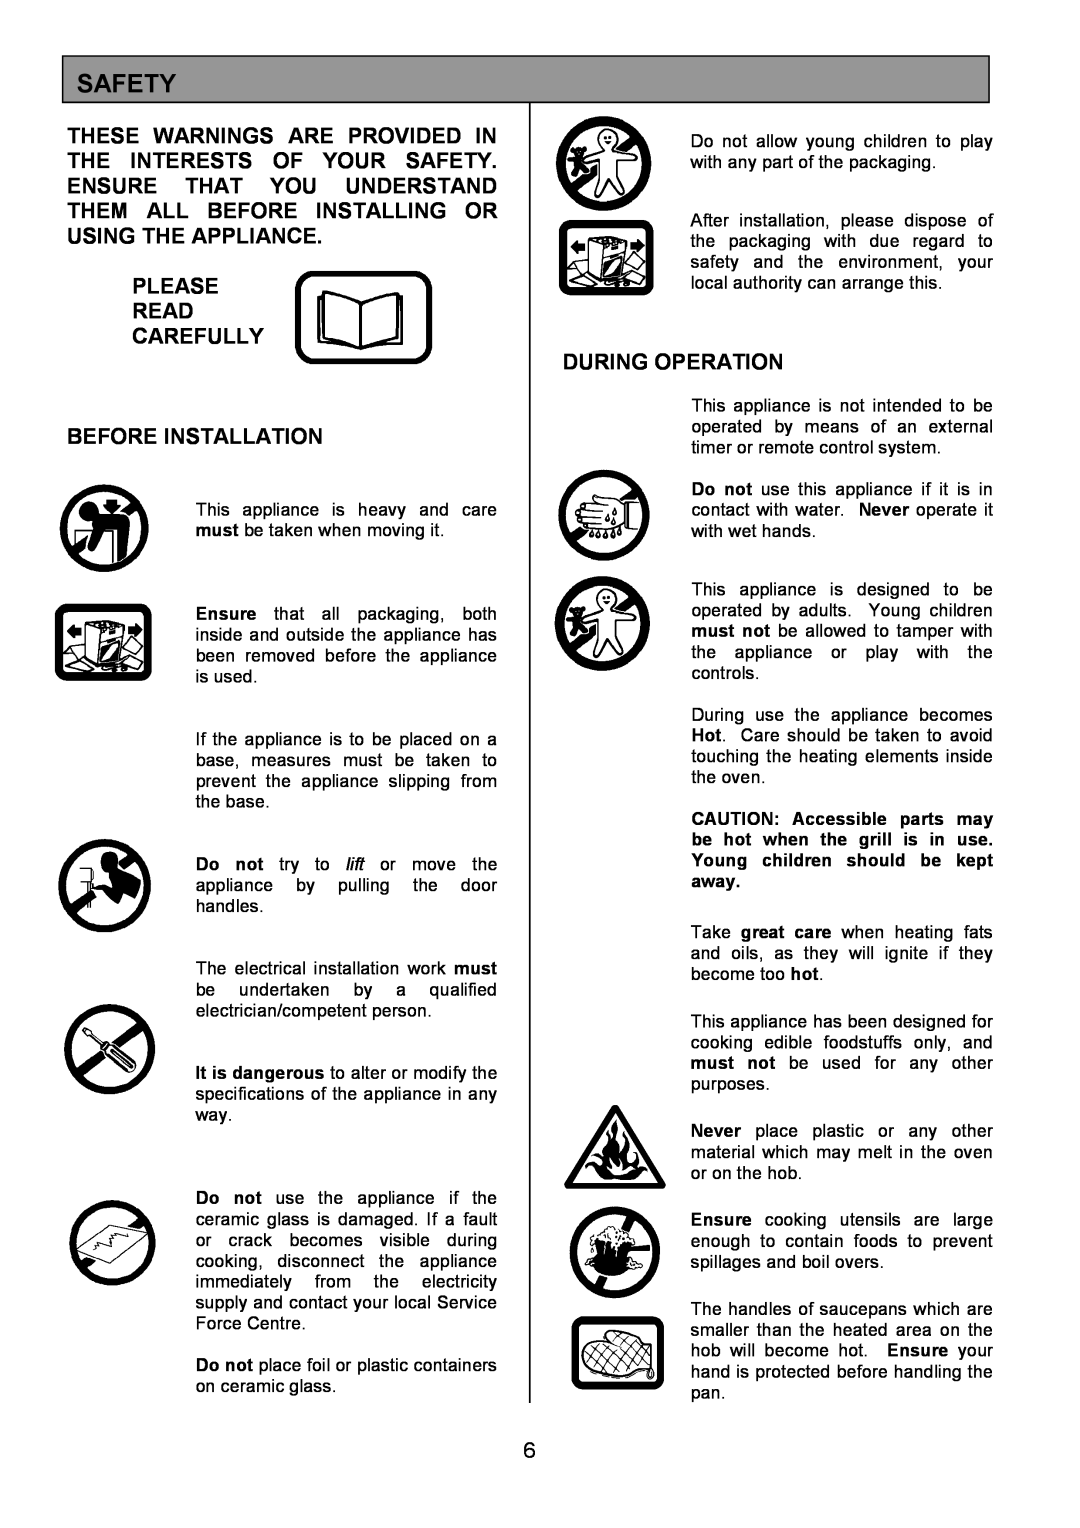 Tricity Bendix SE340 installation instructions Safety, Please Read Carefully Before Installation, During Operation 